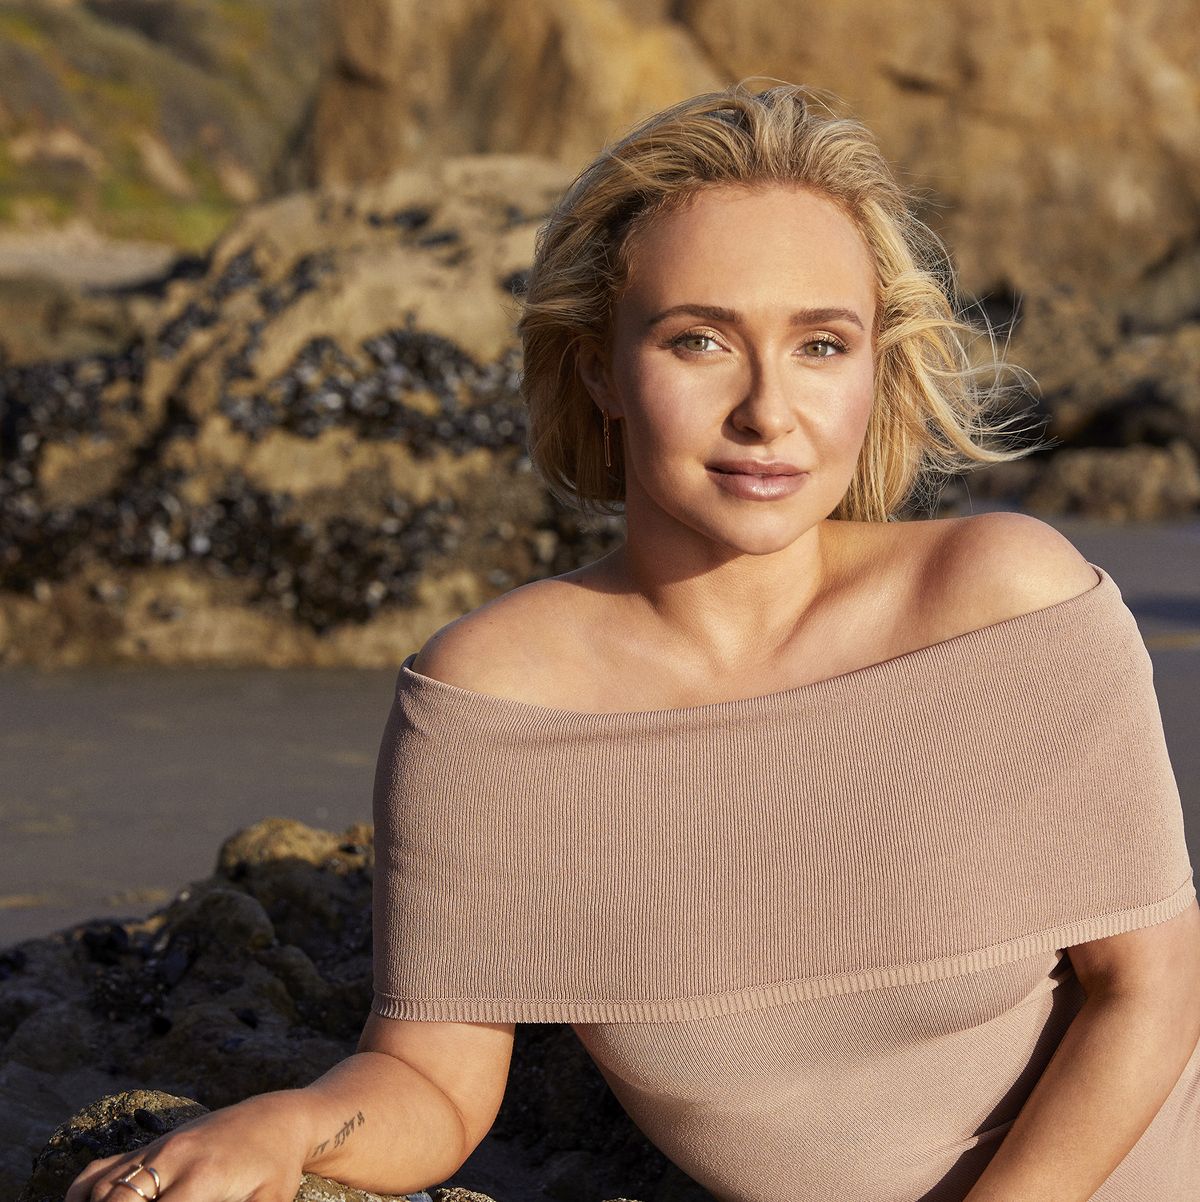 celebrity hayden panettiere laying down on the beach in nude bodysuit, looking at the camera